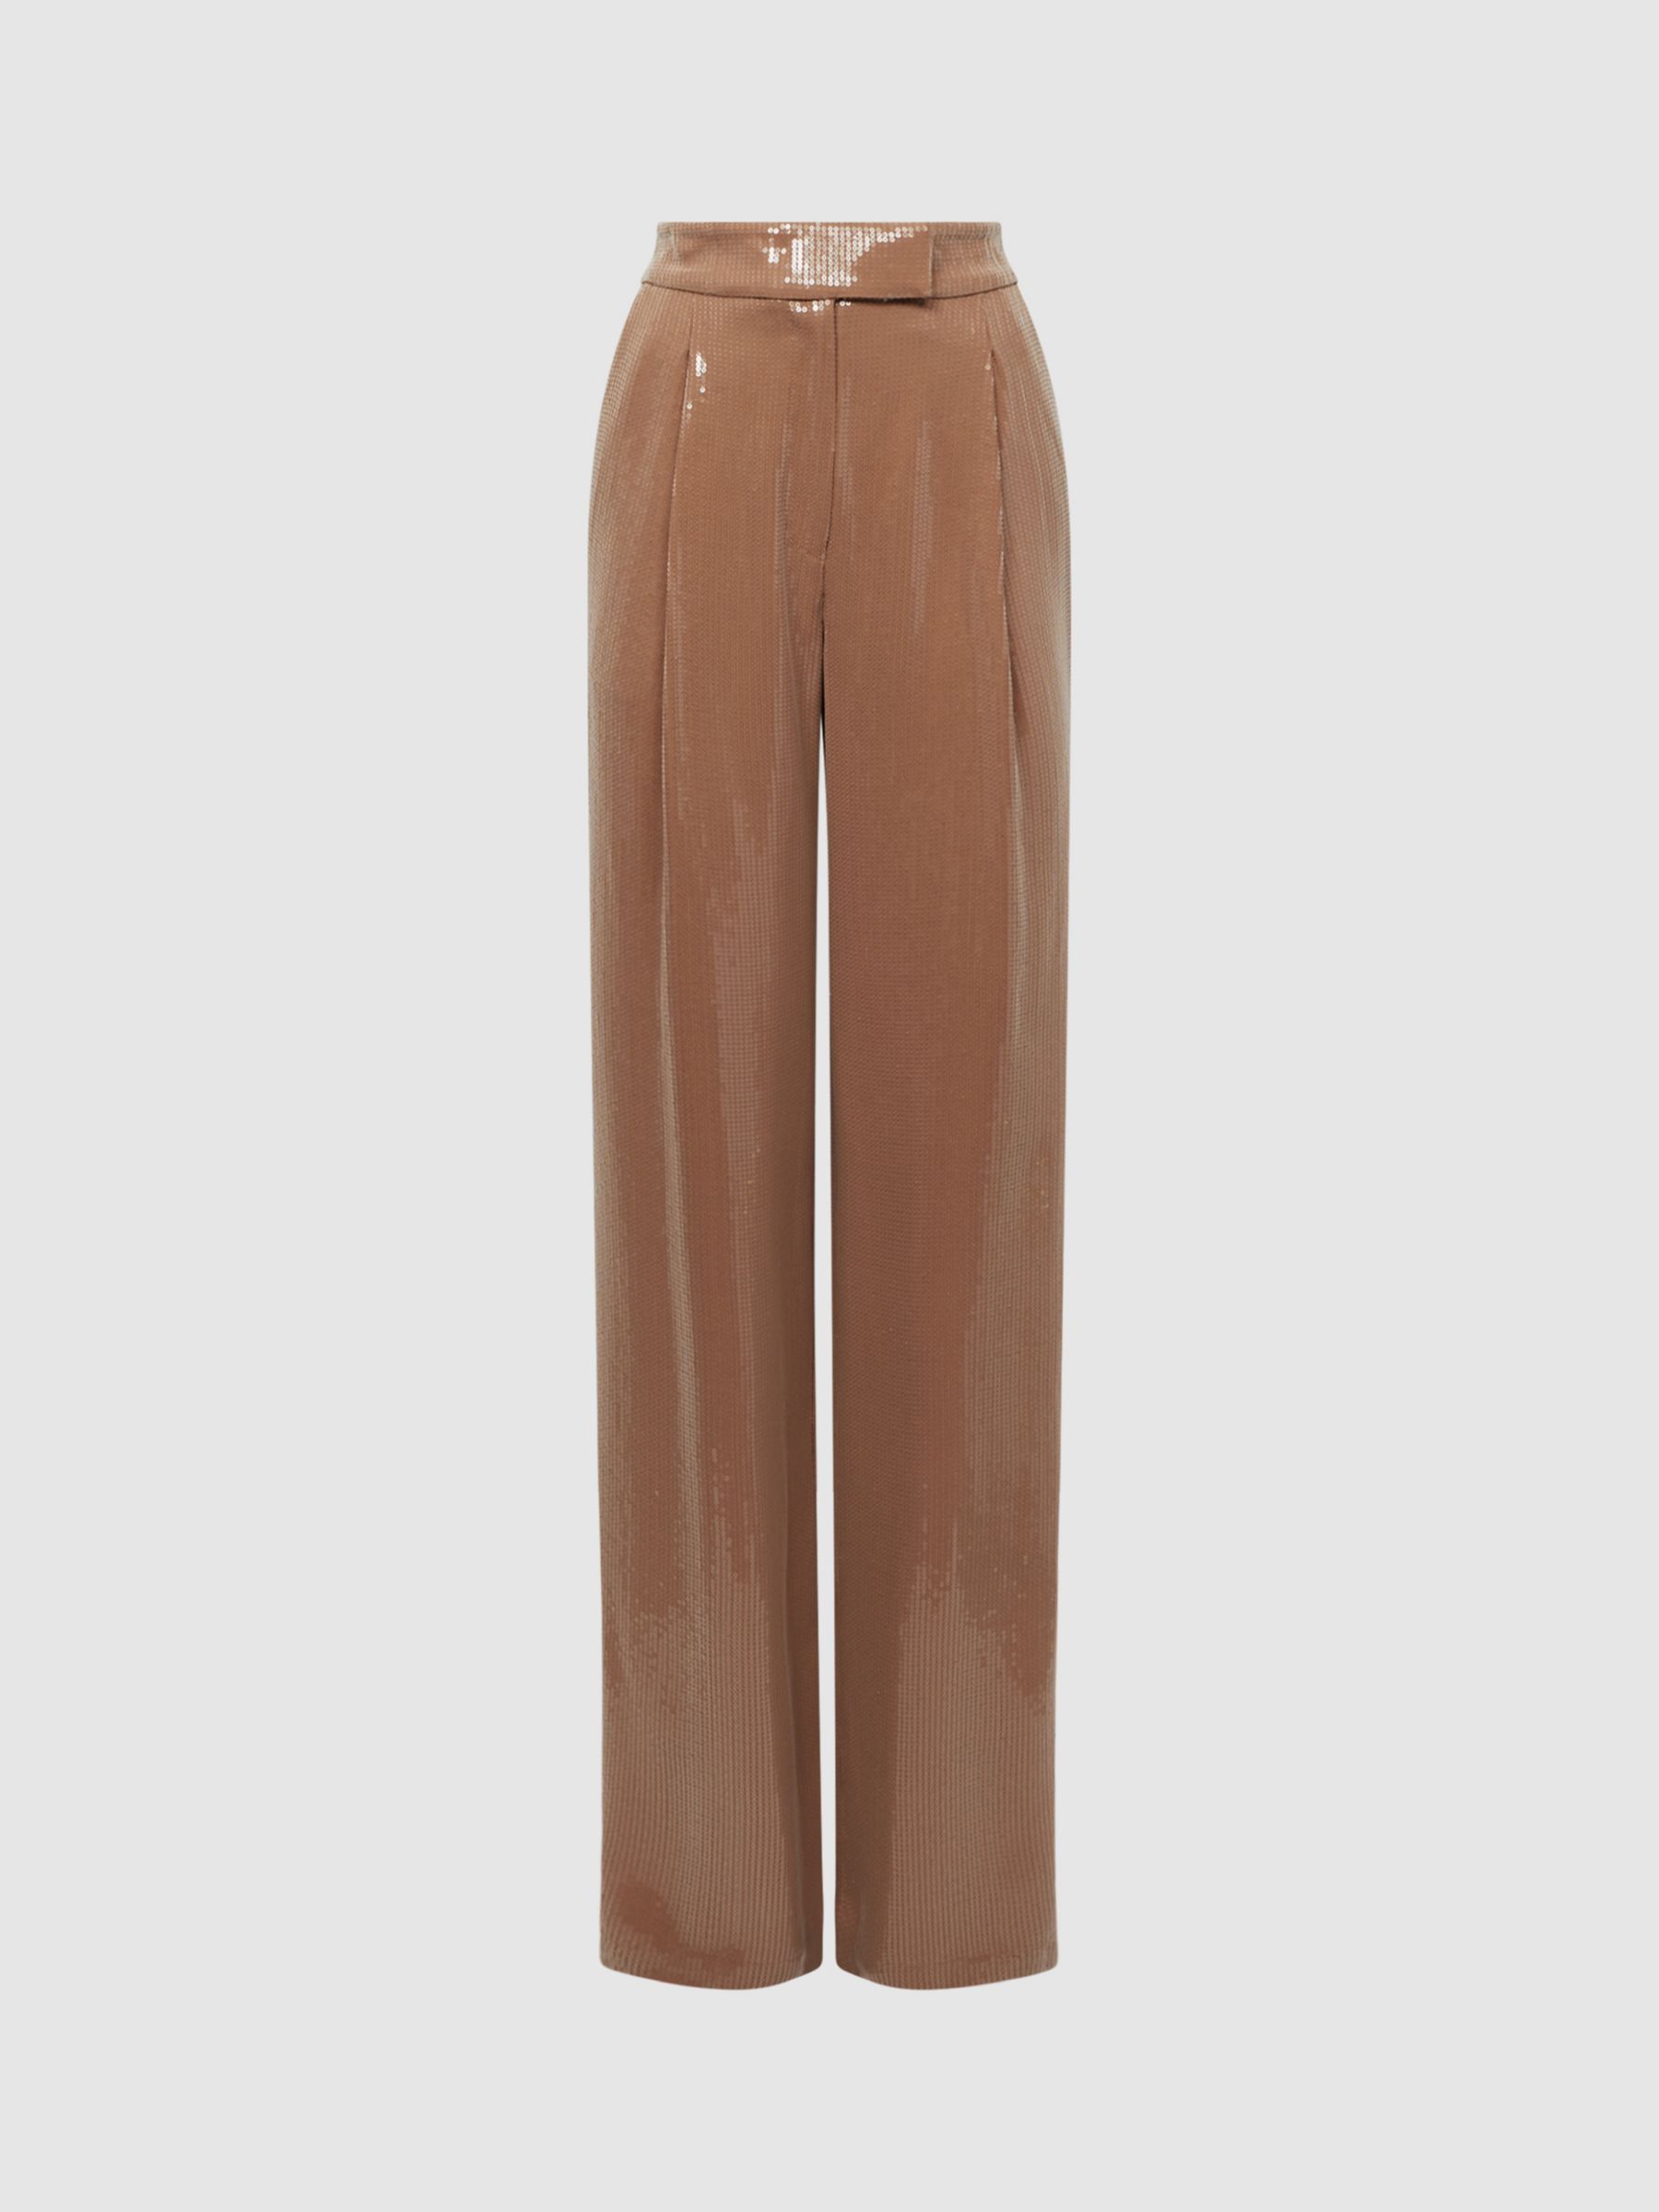 Reiss Lizzie Wide Leg Sequin Embellished Trousers, Brown at John Lewis ...